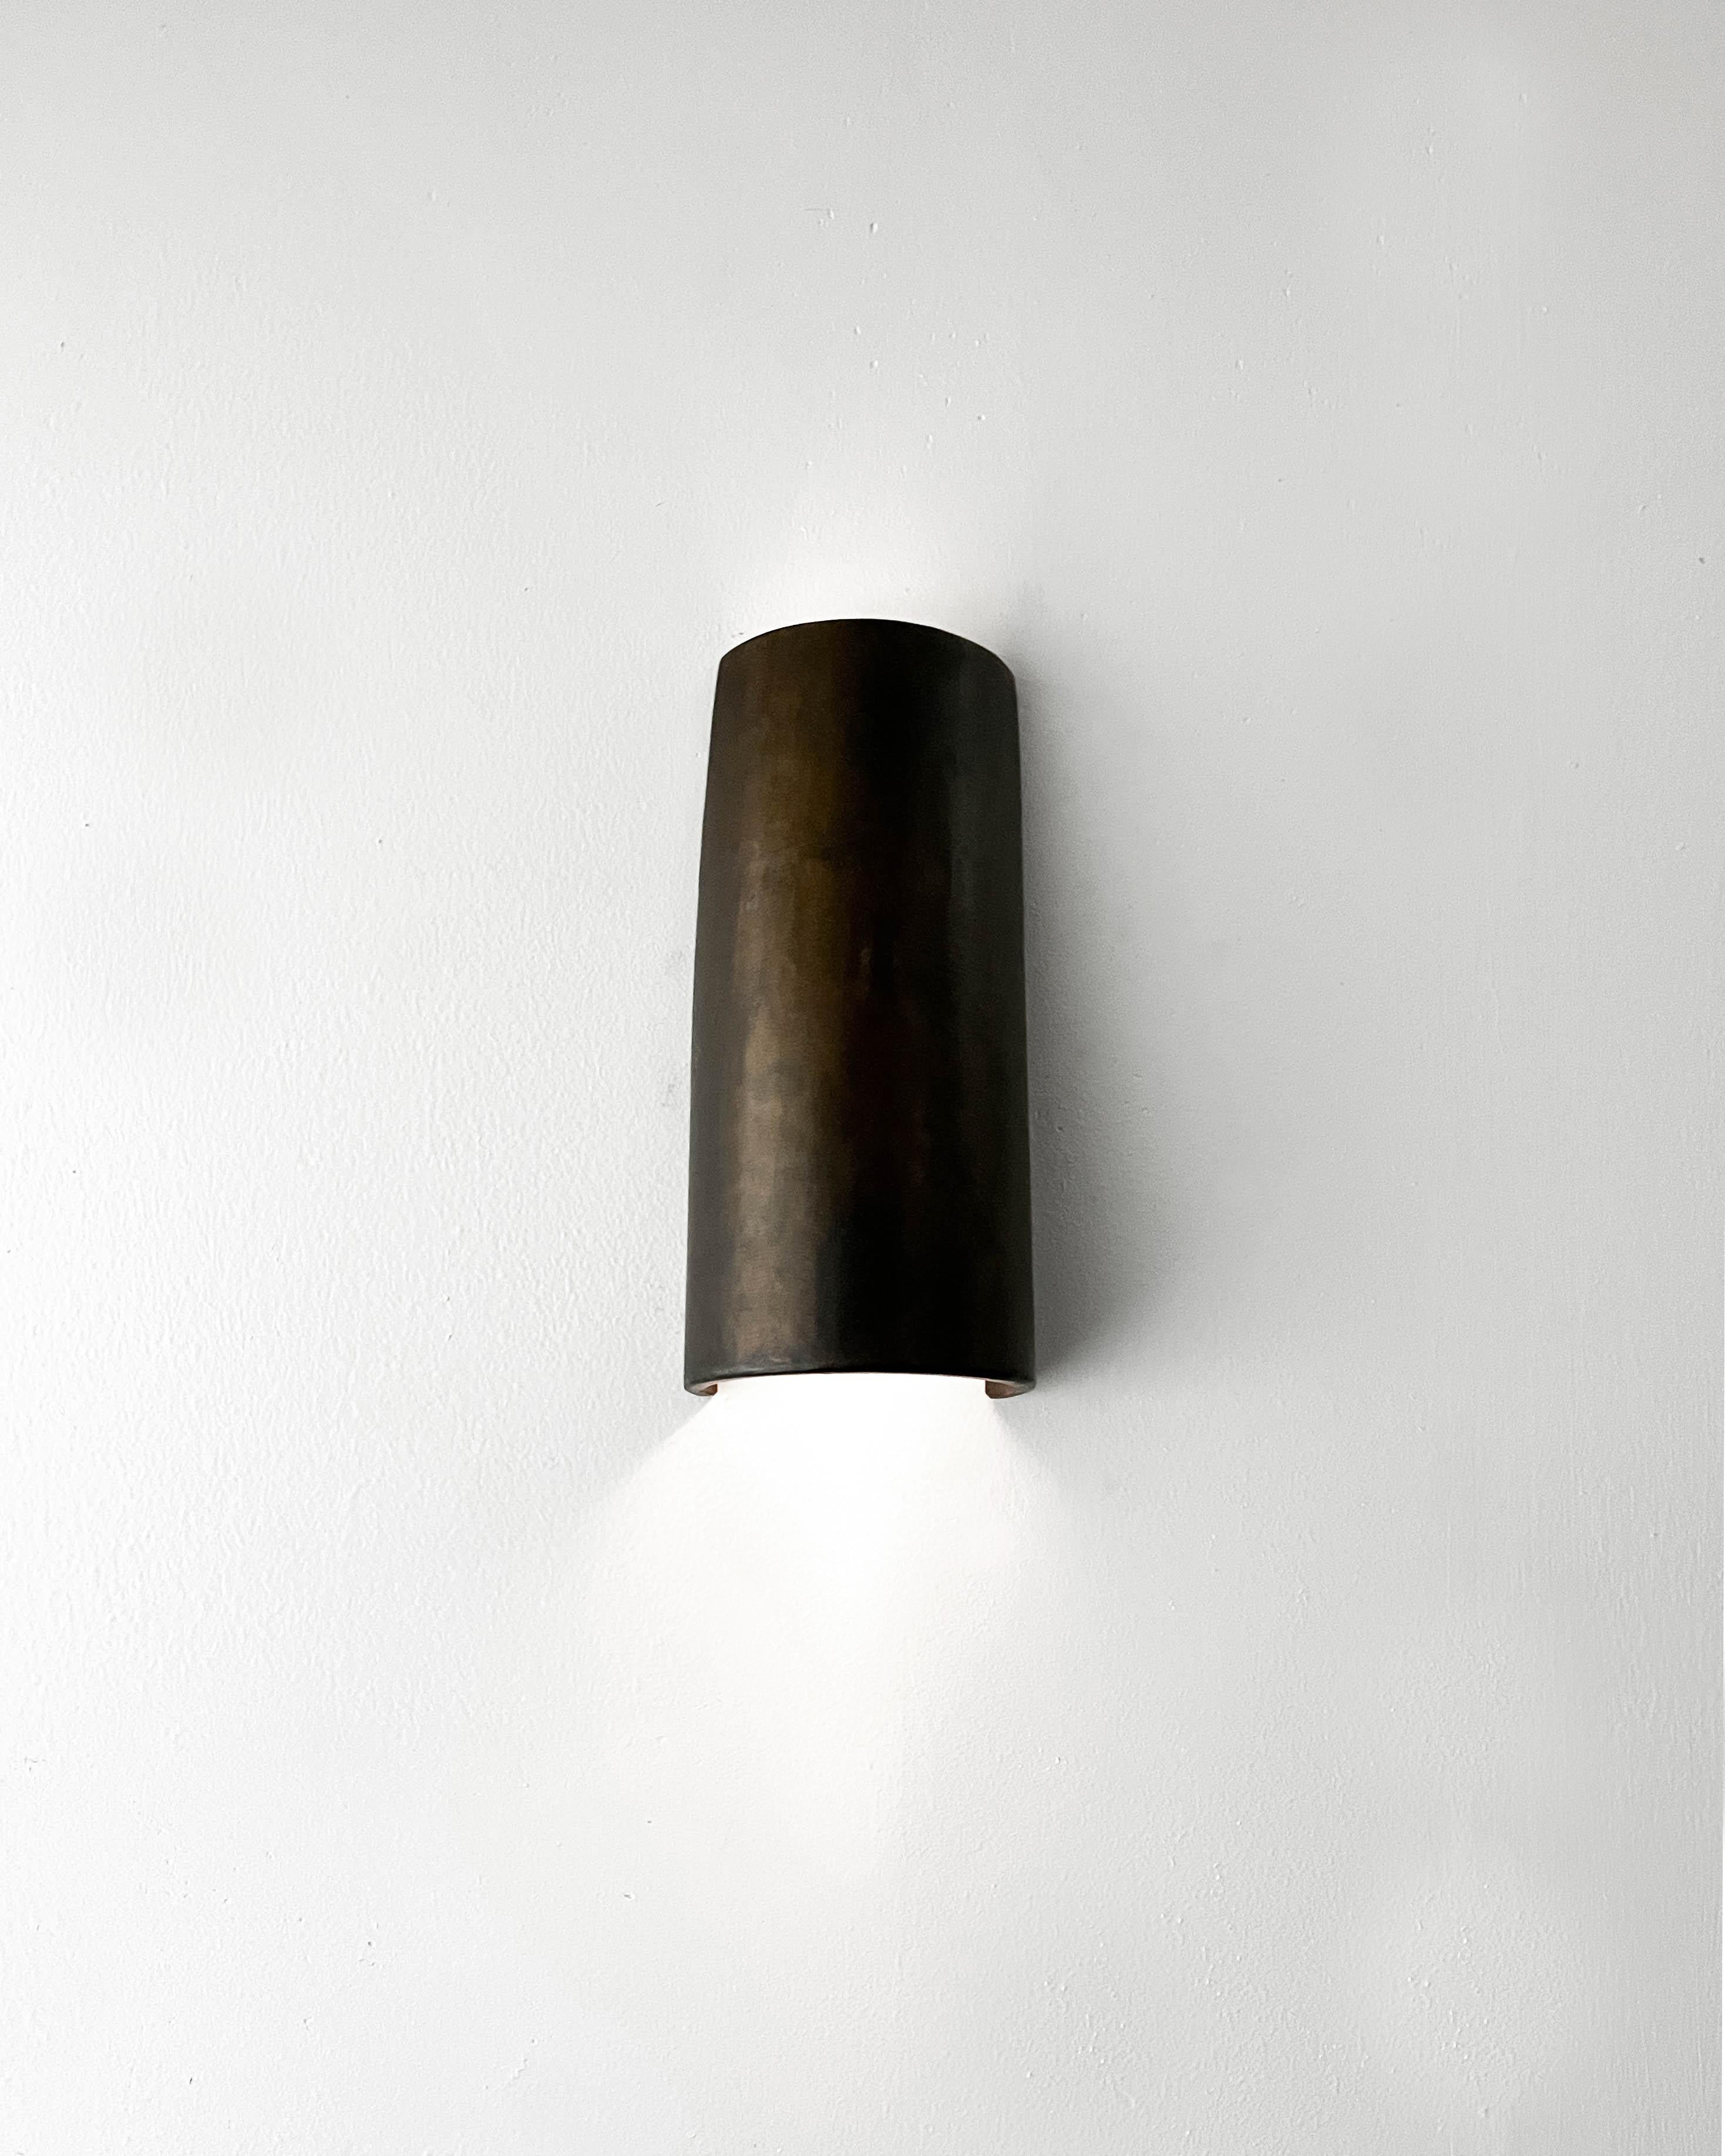 CS Sconce by Cal Summers
Dimension:  W 23 x D 11 x H 8 cm
Materials: Patinated Steel.

All our lamps can be wired according to each country. If sold to the USA it will be wired for the USA for instance.

Cal Summers is a British designer who makes